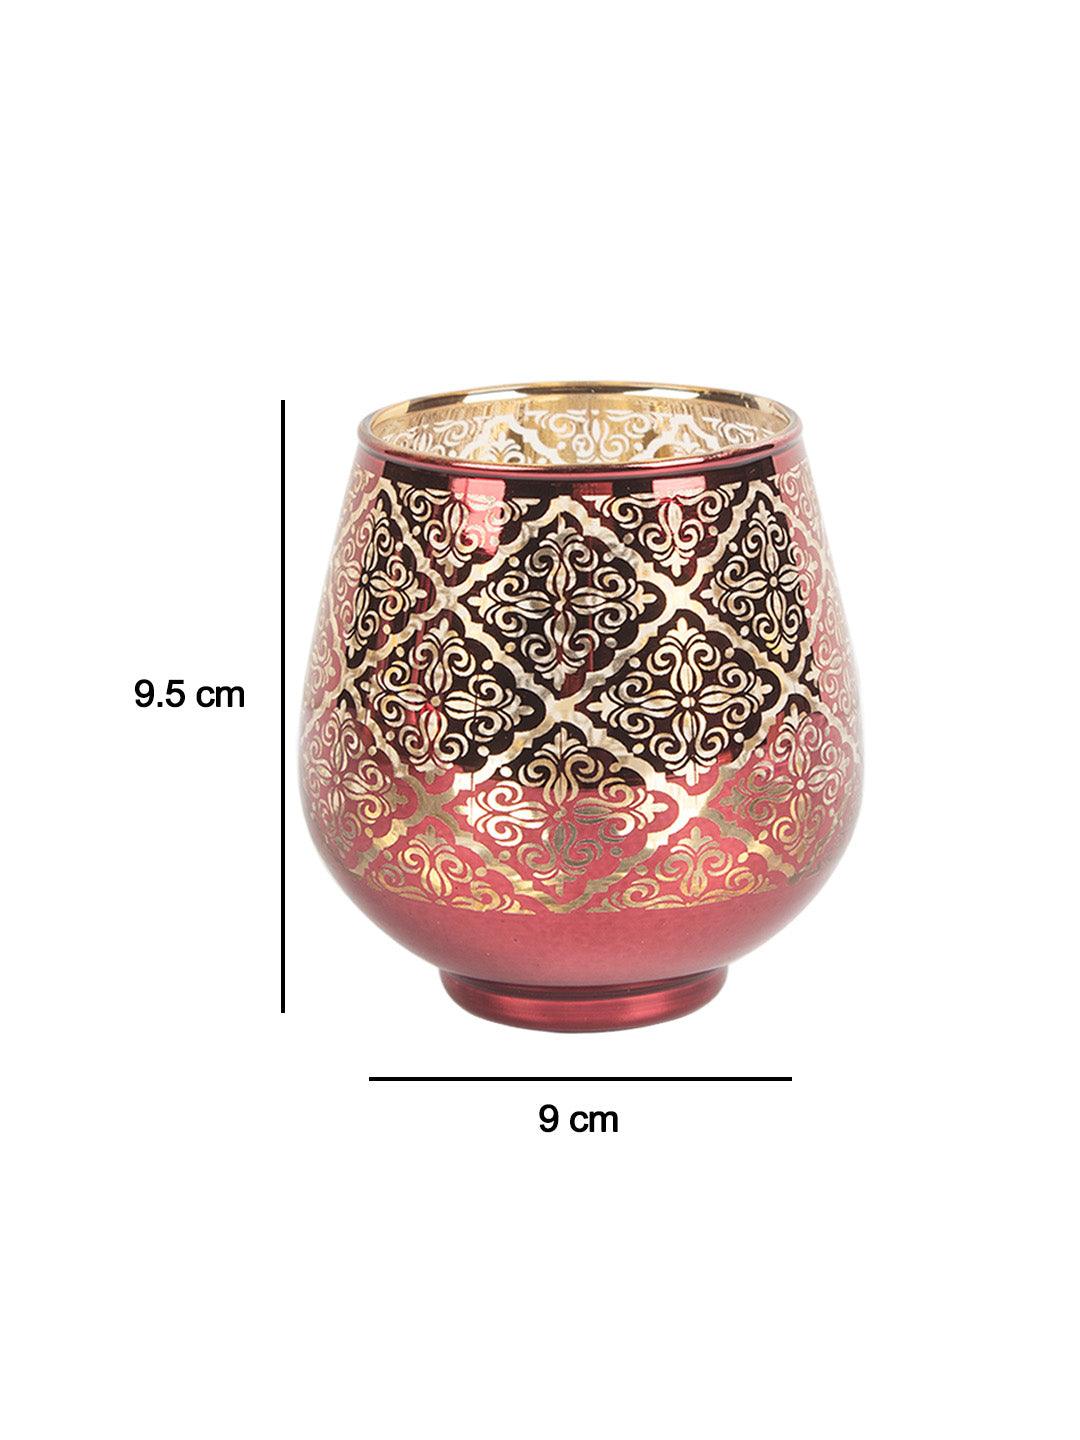 Diwali Decorating Tealight Candle Holders Pack Of 2 Pcs - MARKET 99